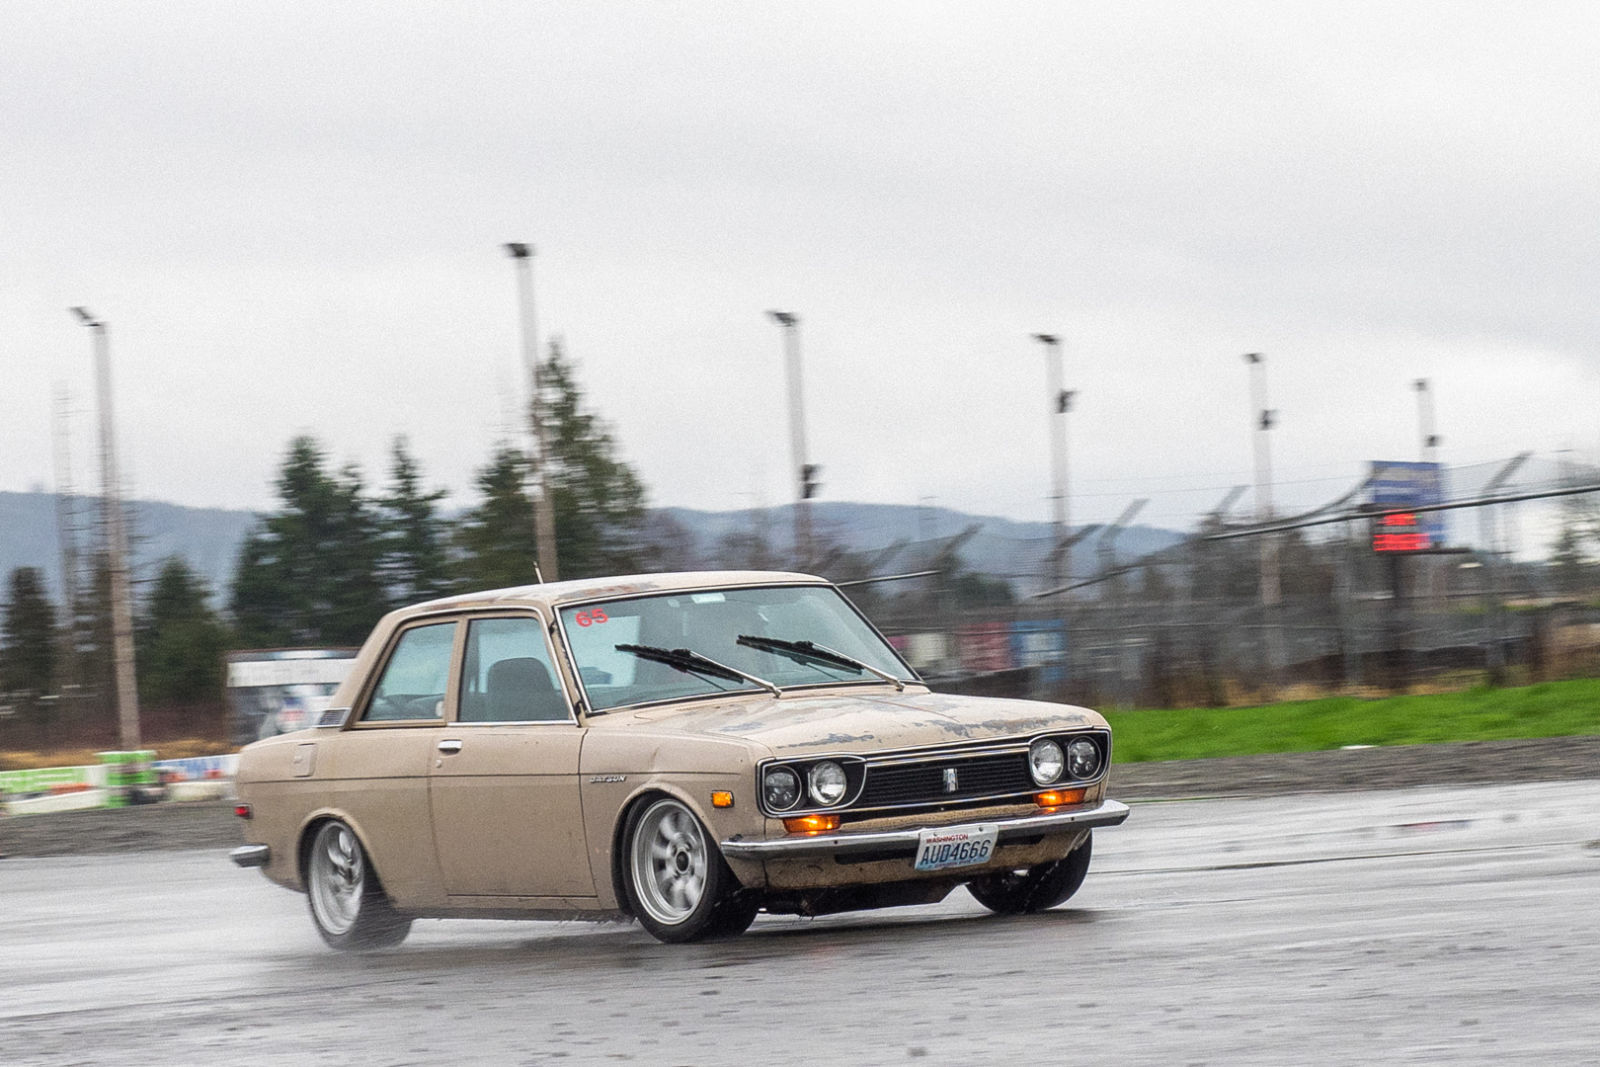 Illustration for article titled Action shots from yesterdays wet autocross